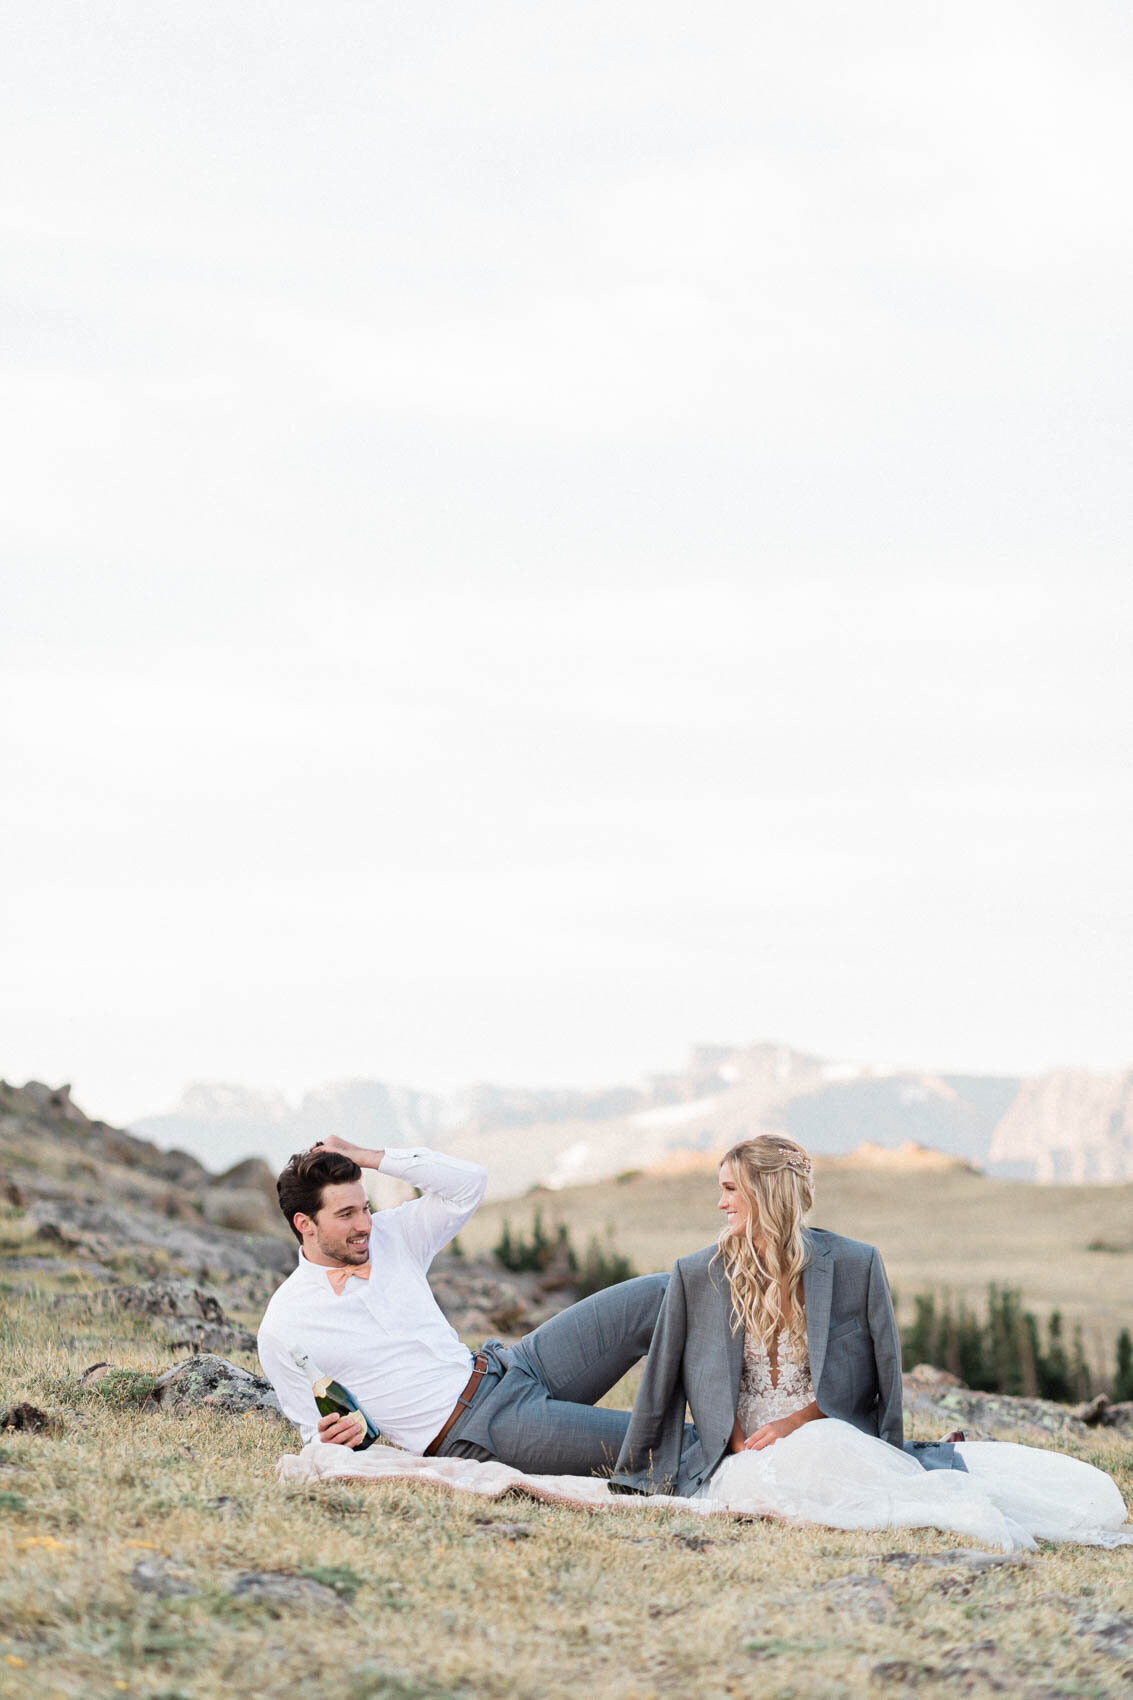 rocky_mountain_national_park_trail_ridge_road_summer_sunrise_elopement_by_colorado_wedding_photographer_diana_coulter-18